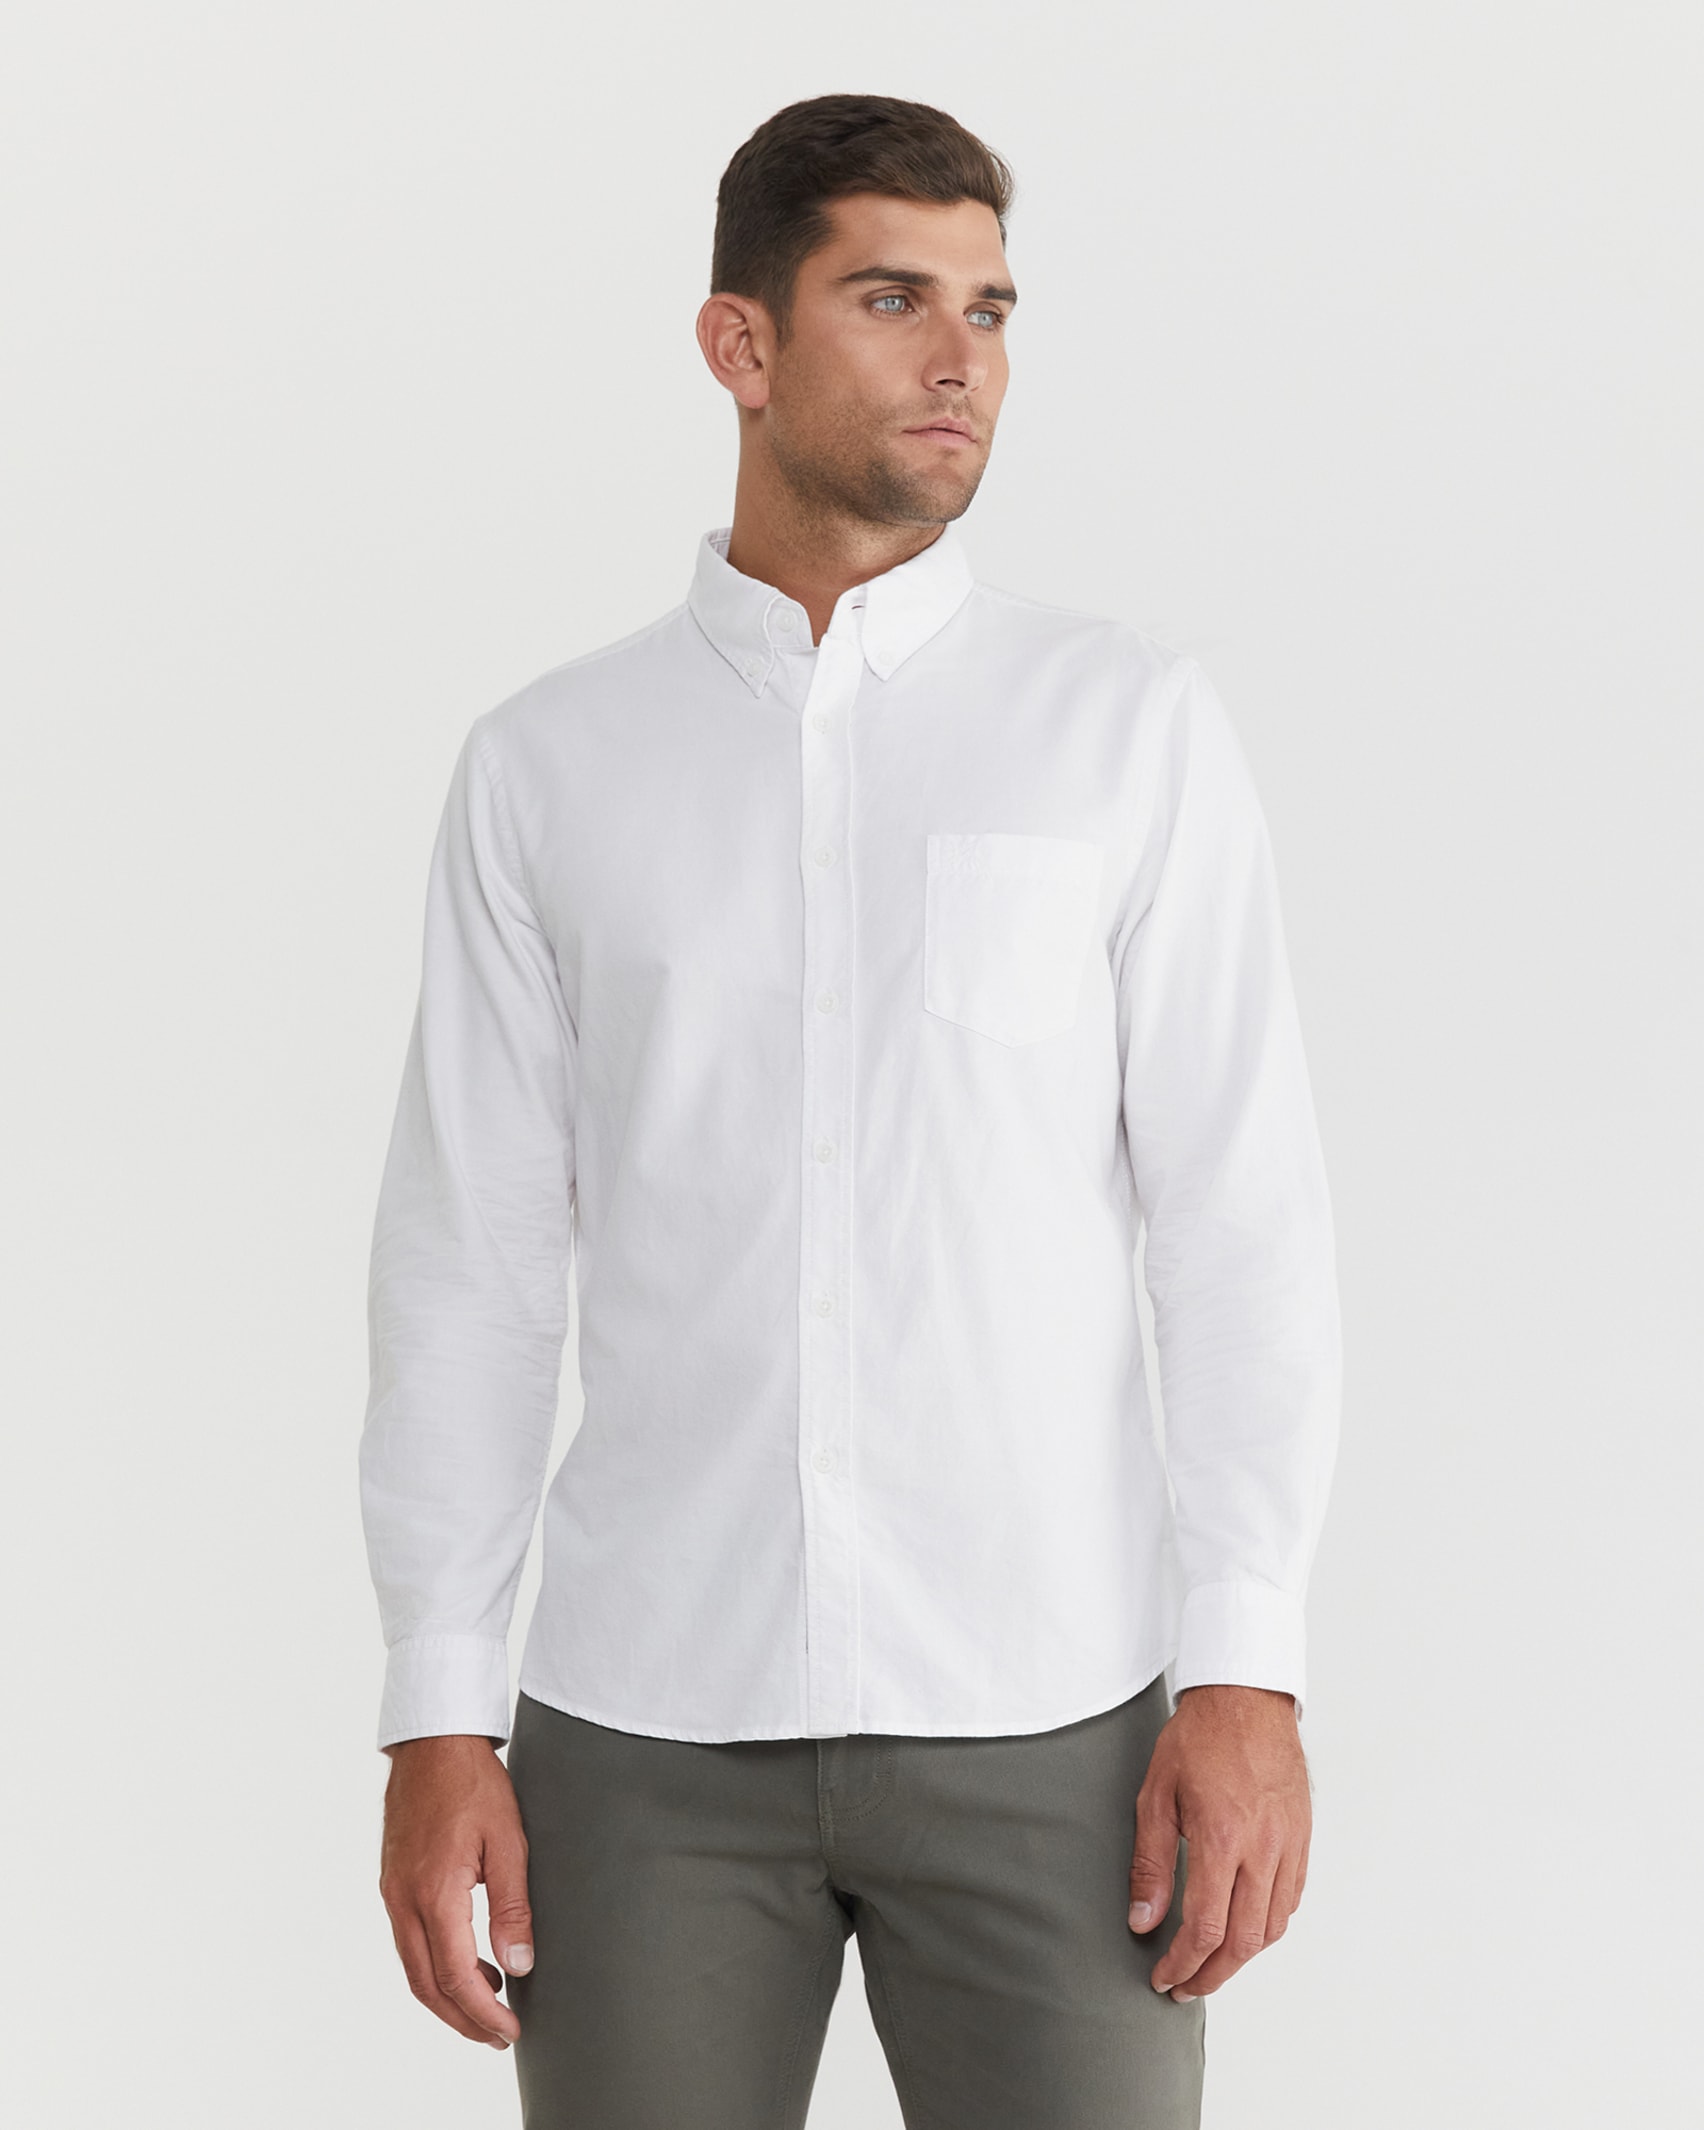 Oxford Long Sleeve Shirt in WHITE